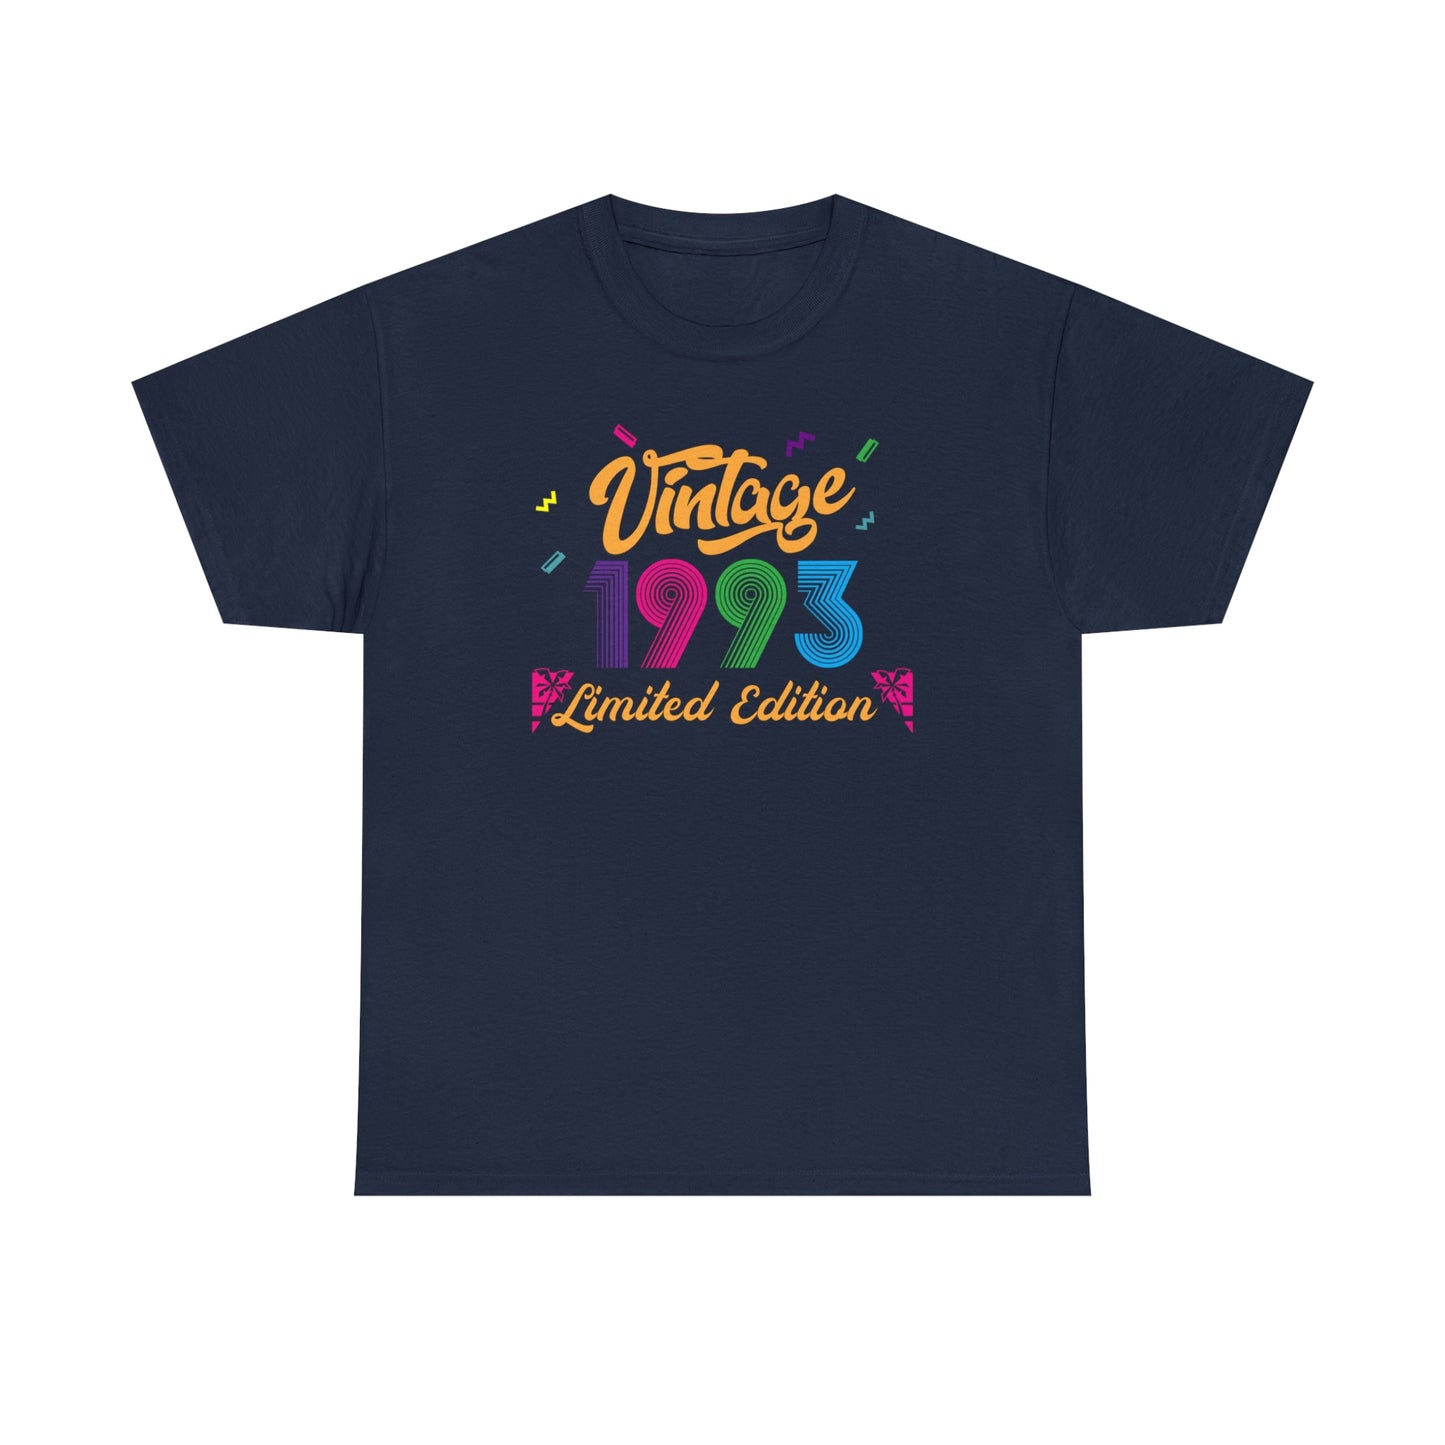 Graduation Year T-Shirt For 1993 T Shirt For Limited Edition TShirt For Class Reunion Shirt For Birth Year Shirt For  Retro Birthday Gift